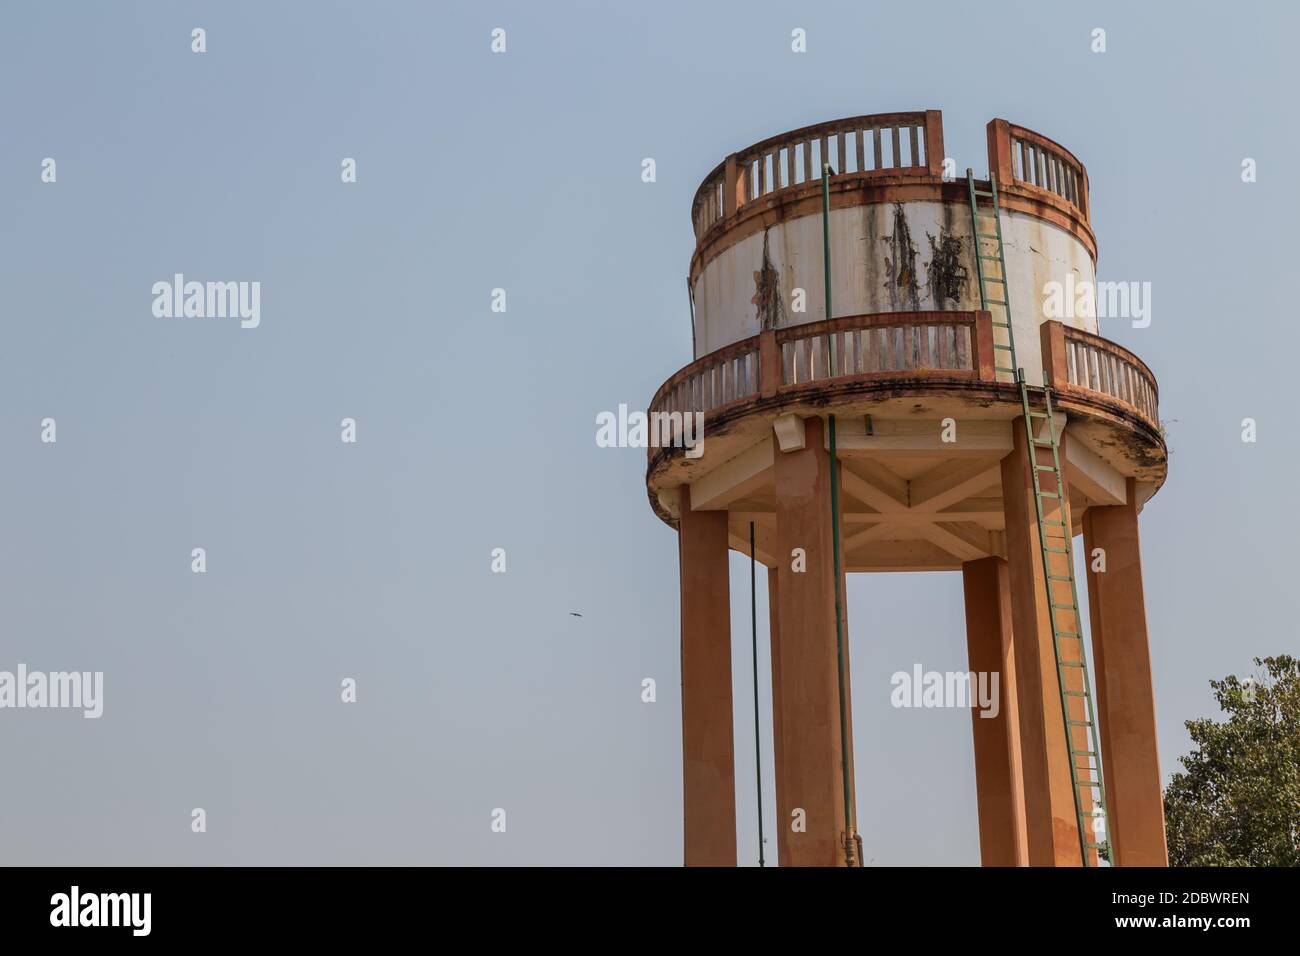 Reservoir tower in Bissau, high concrete infrastructure, Republic of Guinea-Bissau Stock Photo